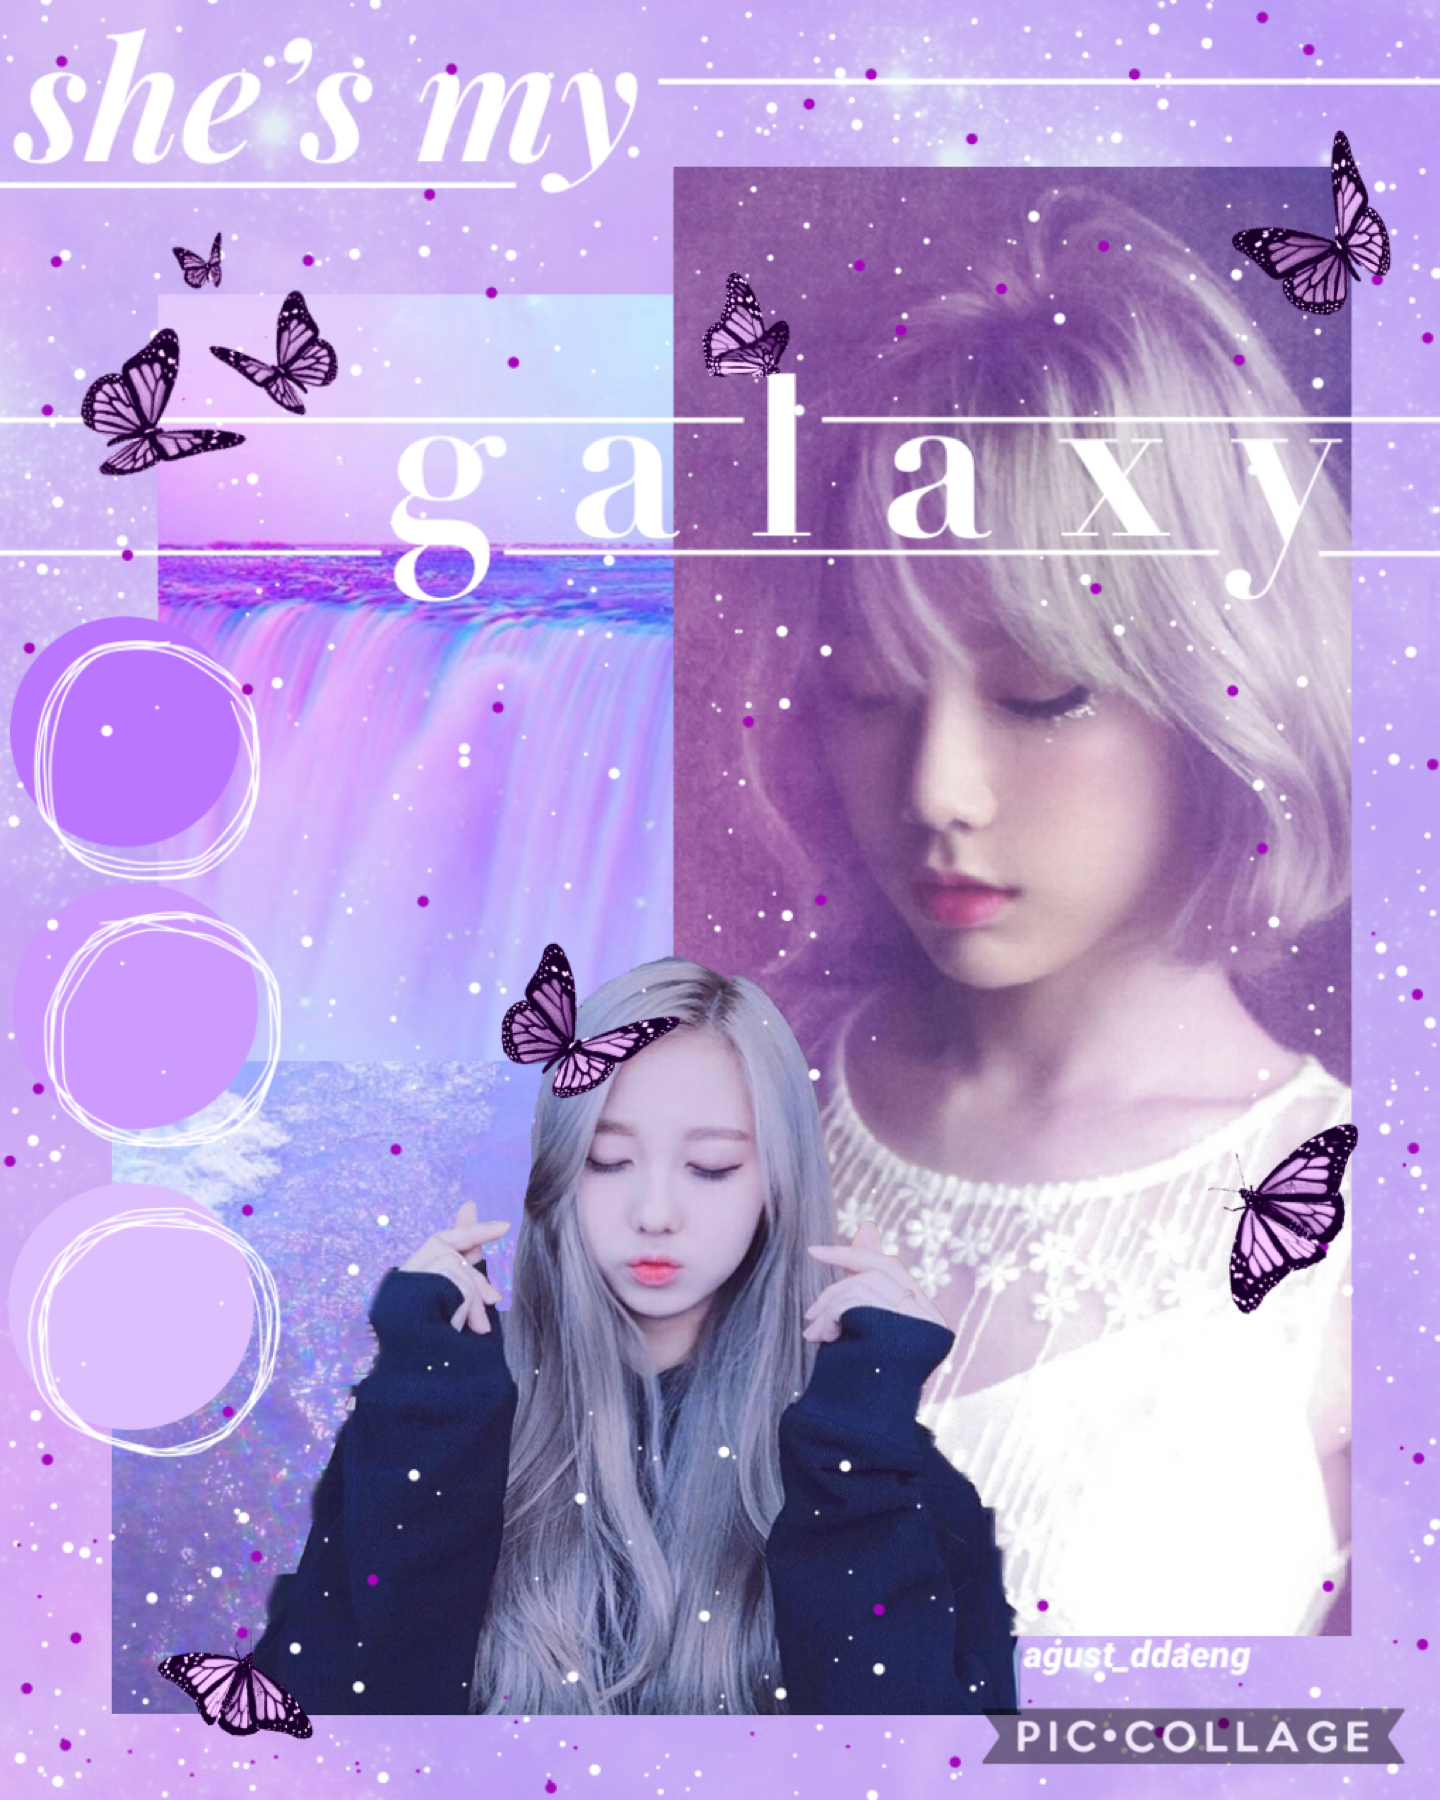 - 🪐 - 
[ 4 - 29 - 20 ]

yet another discarded edit I’m not happy with 🤠

it’s also purple... why? idk

I’m trying to do more non-kpop edits 
but I have no inspo for them ;-; 

check comments for extended caption 

august💫

- 🪐 -